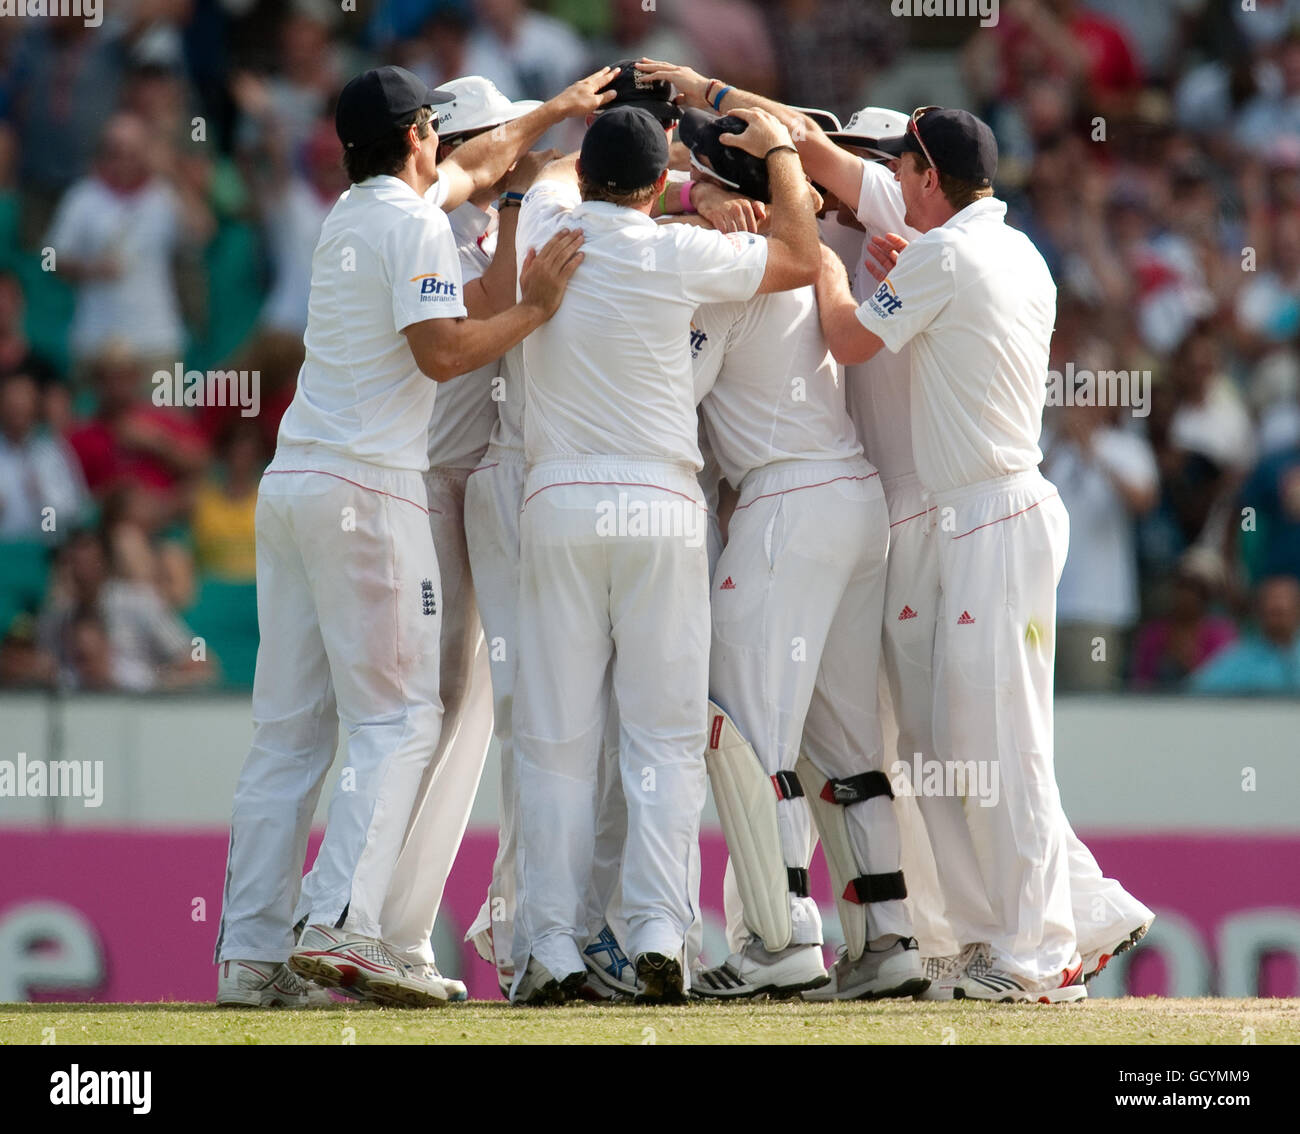 England celebrate after Tim Bresnan dismisses Australia's Michael Hussey during the fifth Ashes Test at the Sydney Cricket Ground, Sydney, Australia. Stock Photo